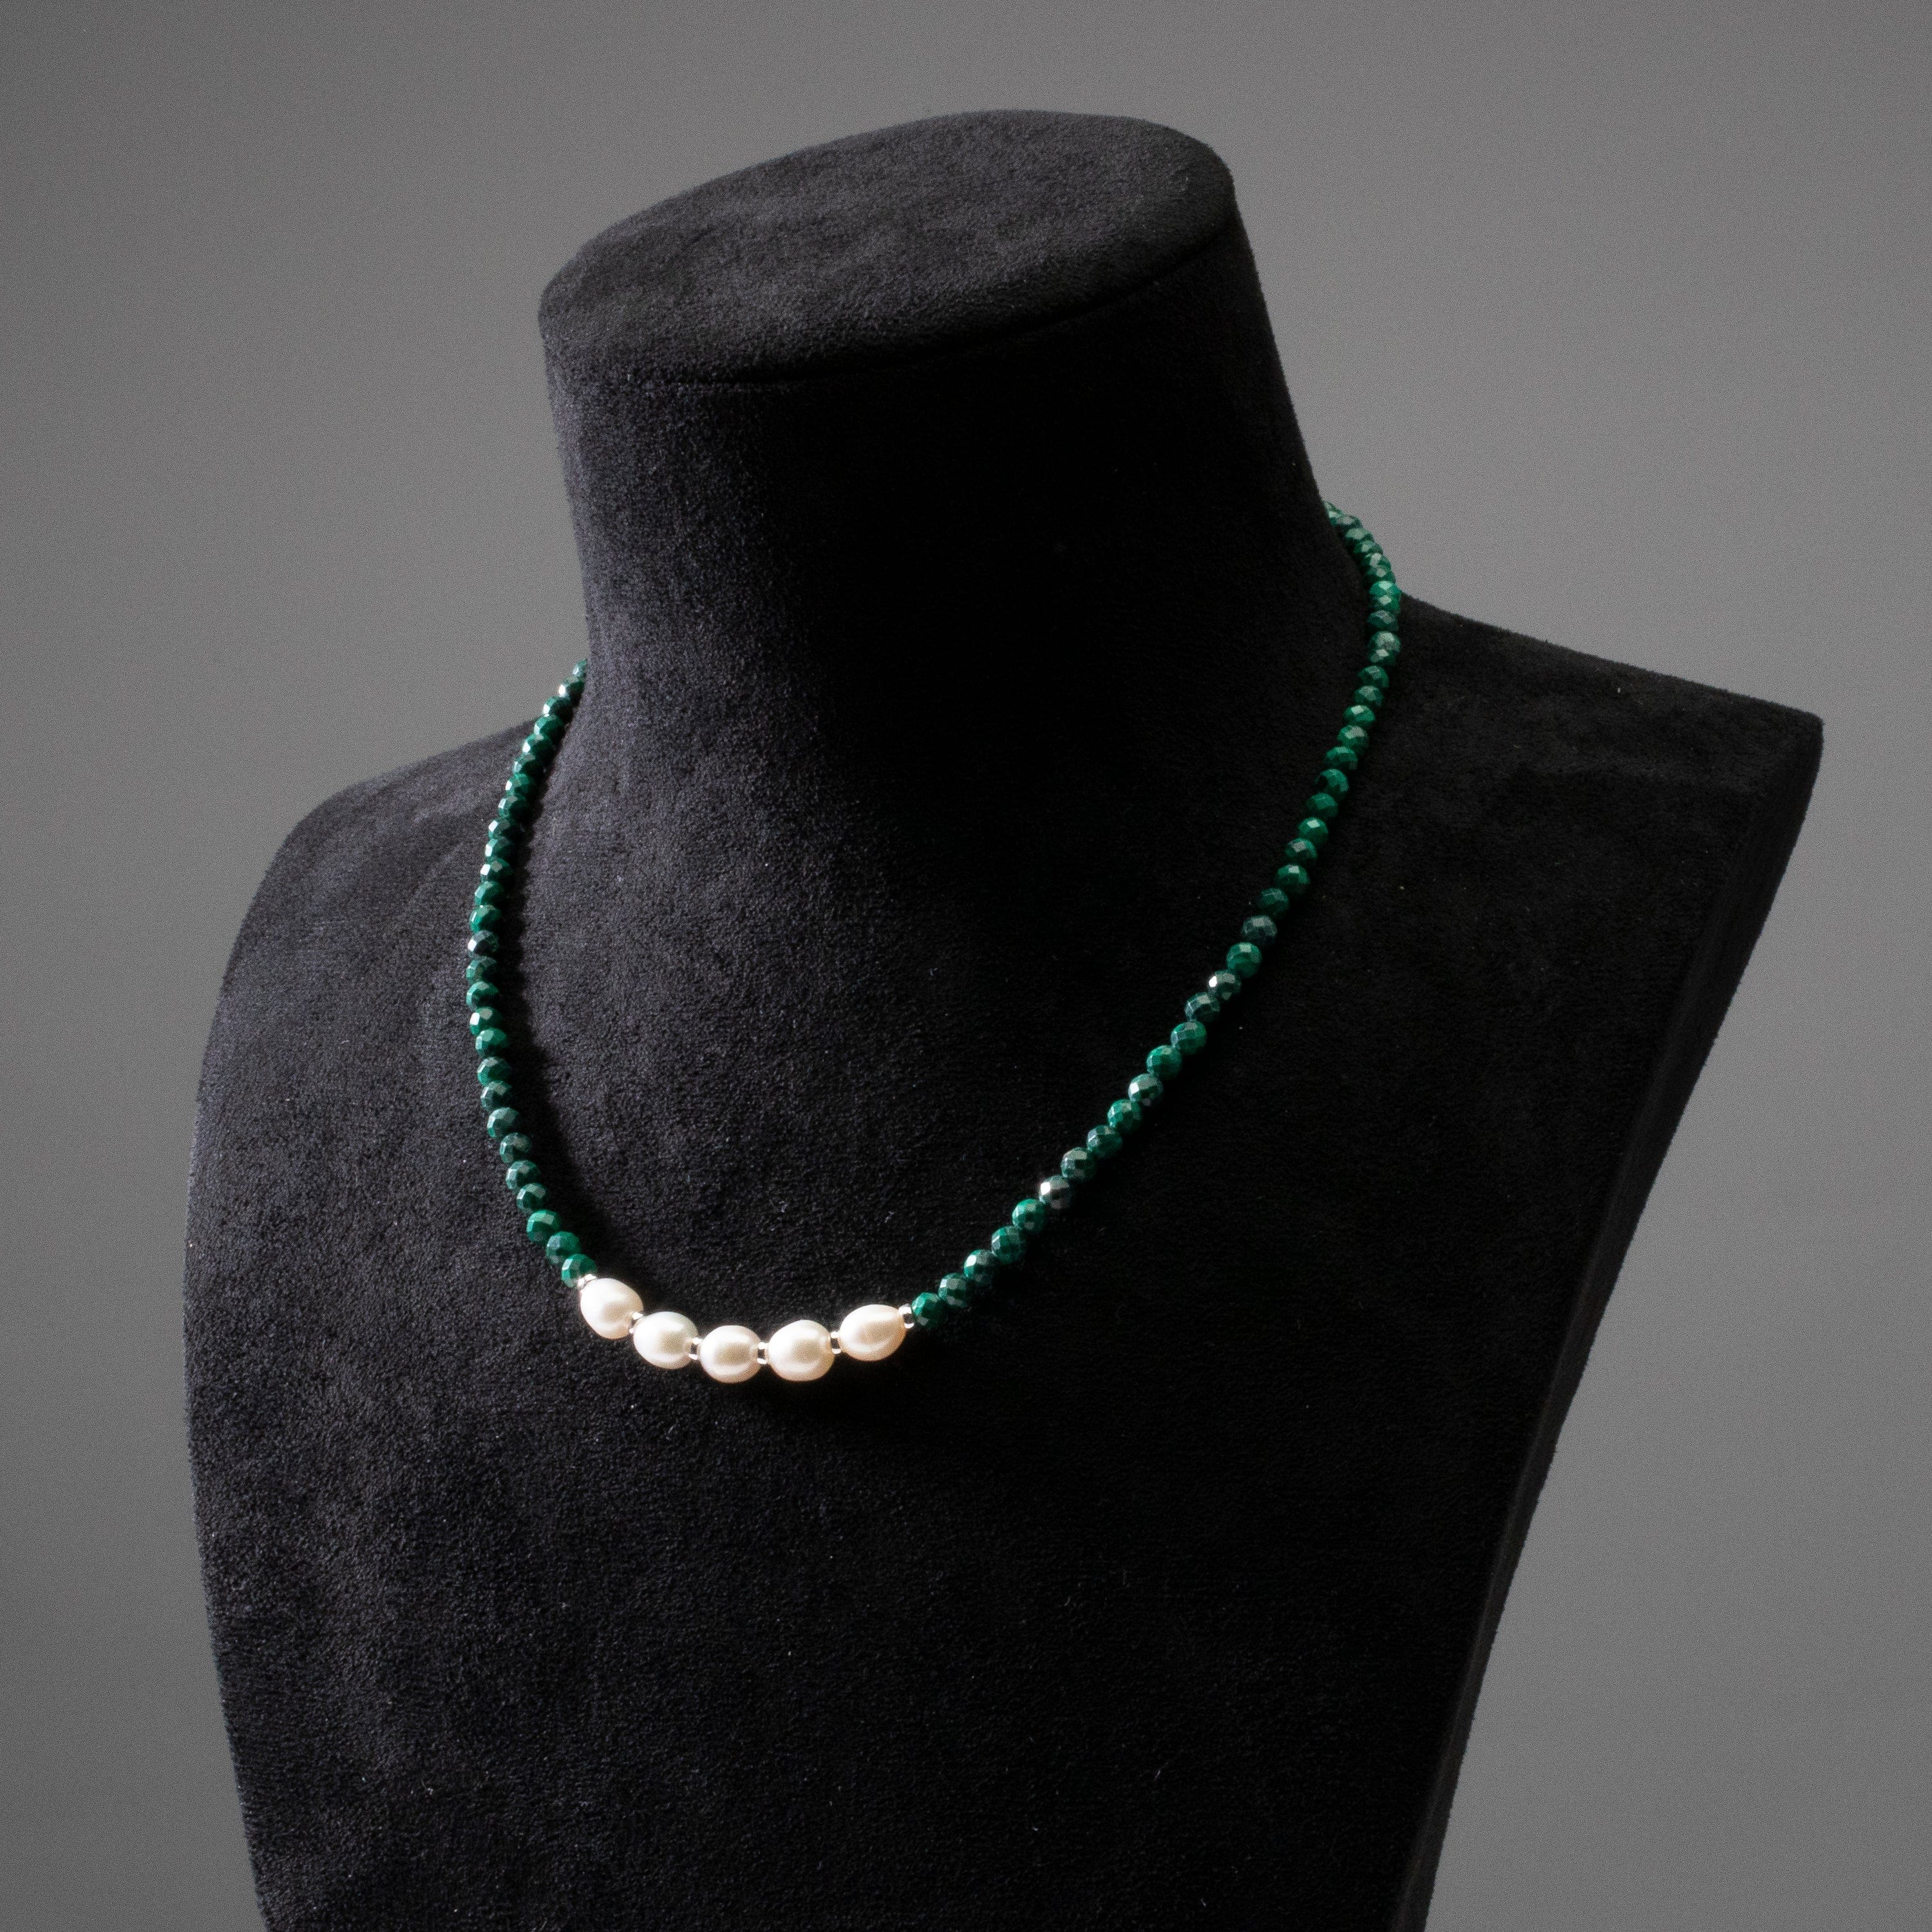 KALIFANO Jewelry 4mm Faceted Malachite Bead Necklace with 5 Pearls with 925 Silver Clasp 4MMA